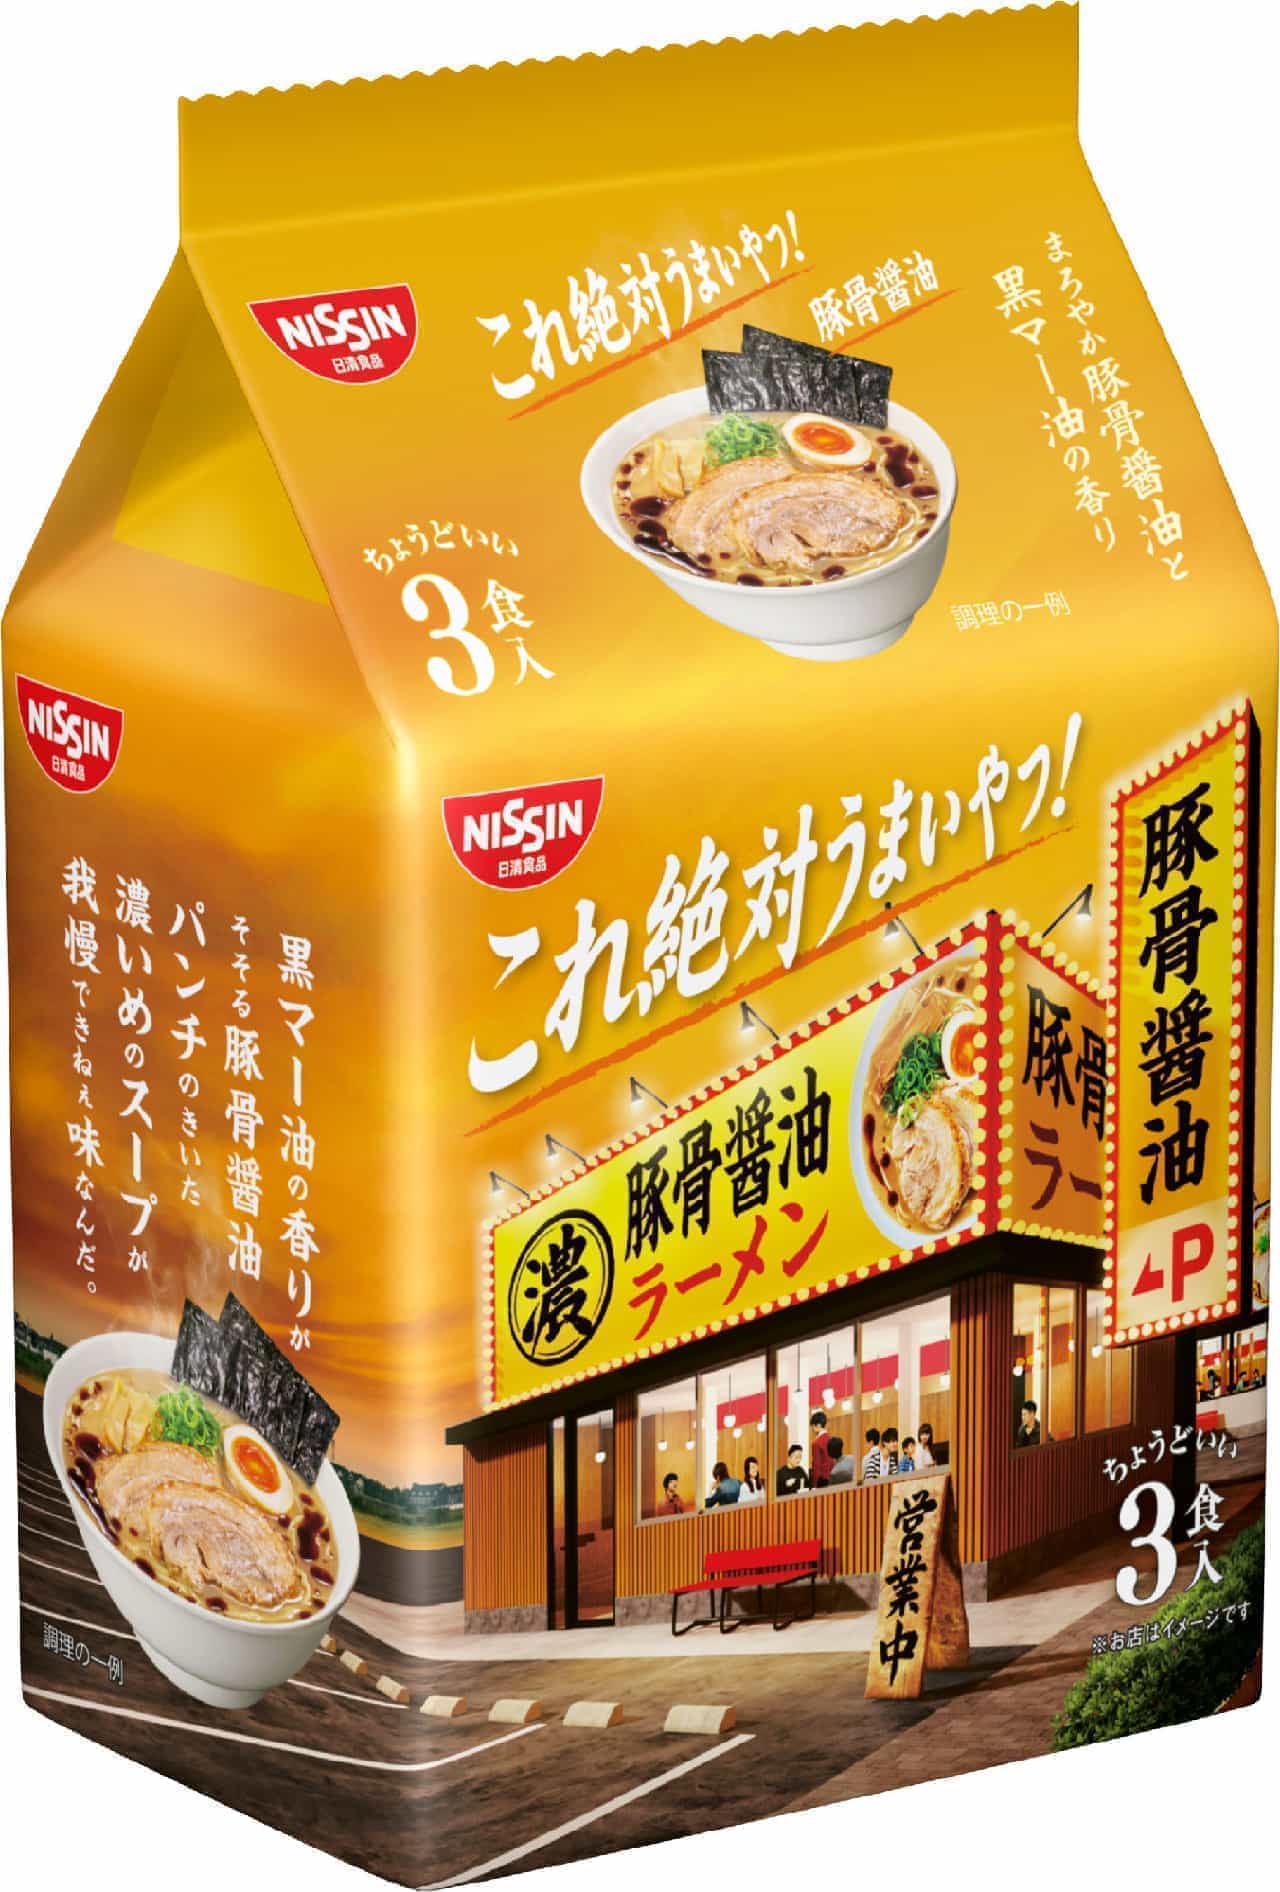 Fukuromen "Nissin this is absolutely delicious!"